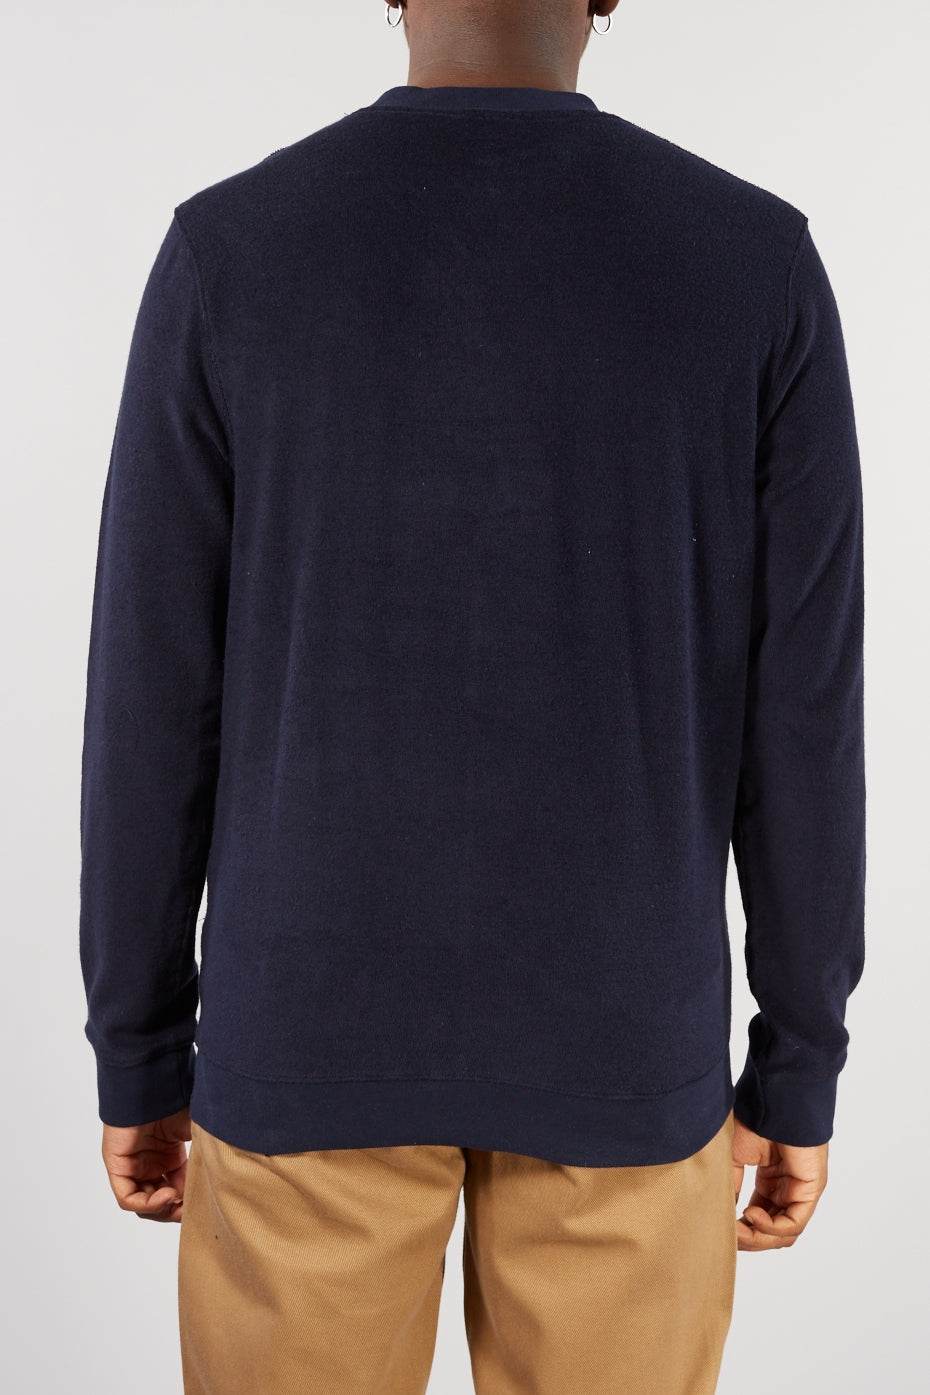 SELECTED HOMME NAVY TOWELLING CLEVE CREW NECK SWEATER